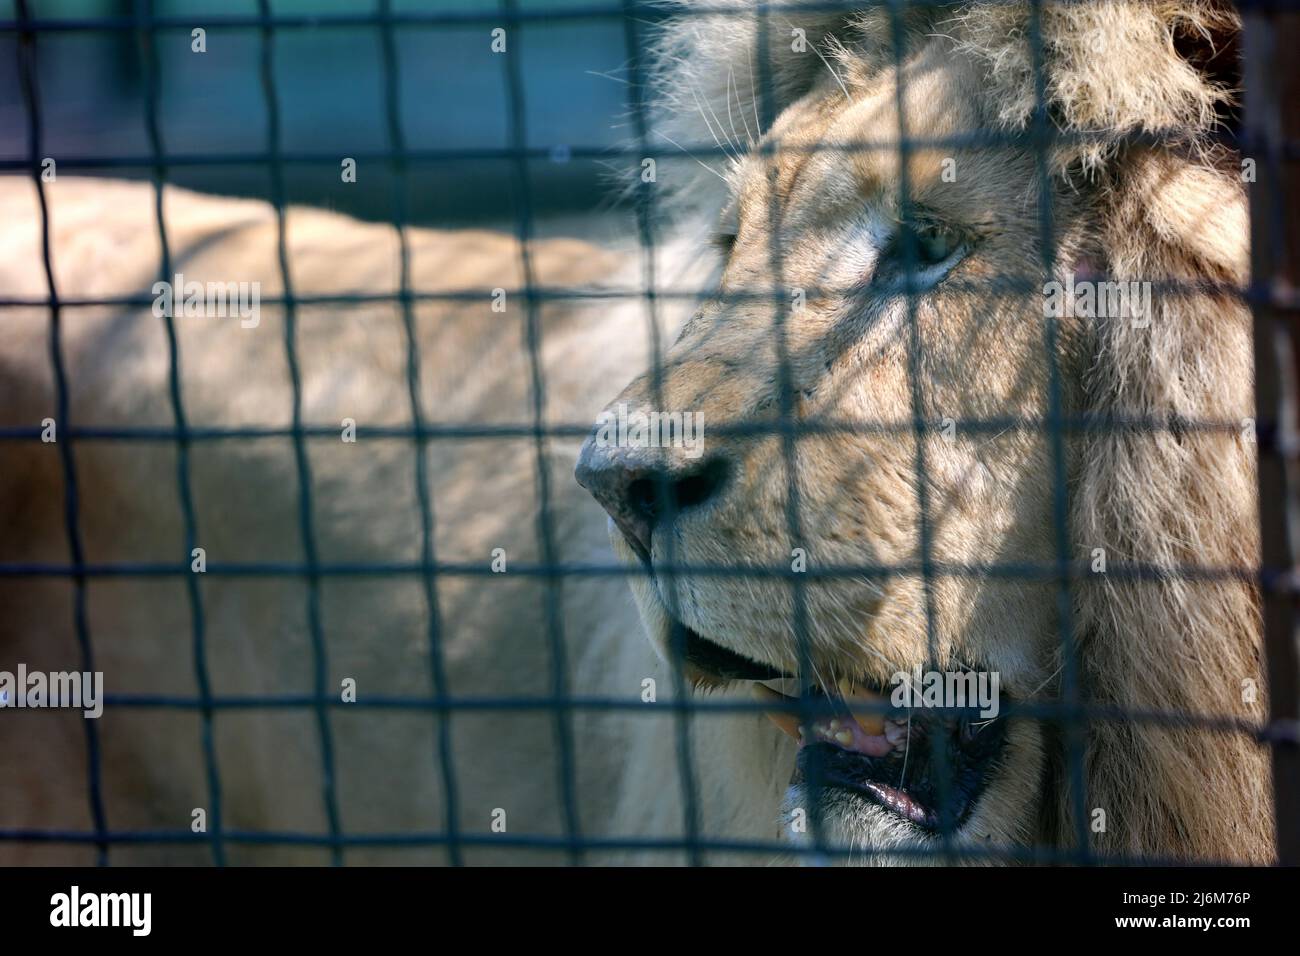 A close-up of a caged lion at a zoo. On the night of April 13, 2022, white lions Mufasa and Nola from the Kharkiv Ecopark were taken to the Odessa Zoo. As a result of being in a cramped room (the enclosures were damaged by shelling), the lions were in a terrible state, exhausted and stressed. But in 2 weeks, Mufasa and Nola recovered quickly - both physically and psychologically. On April 30, 2022, the 'White Lions Festival' took place in the Odessa Zoo, the main characters of which were the rescued Kharkiv lions. Stock Photo